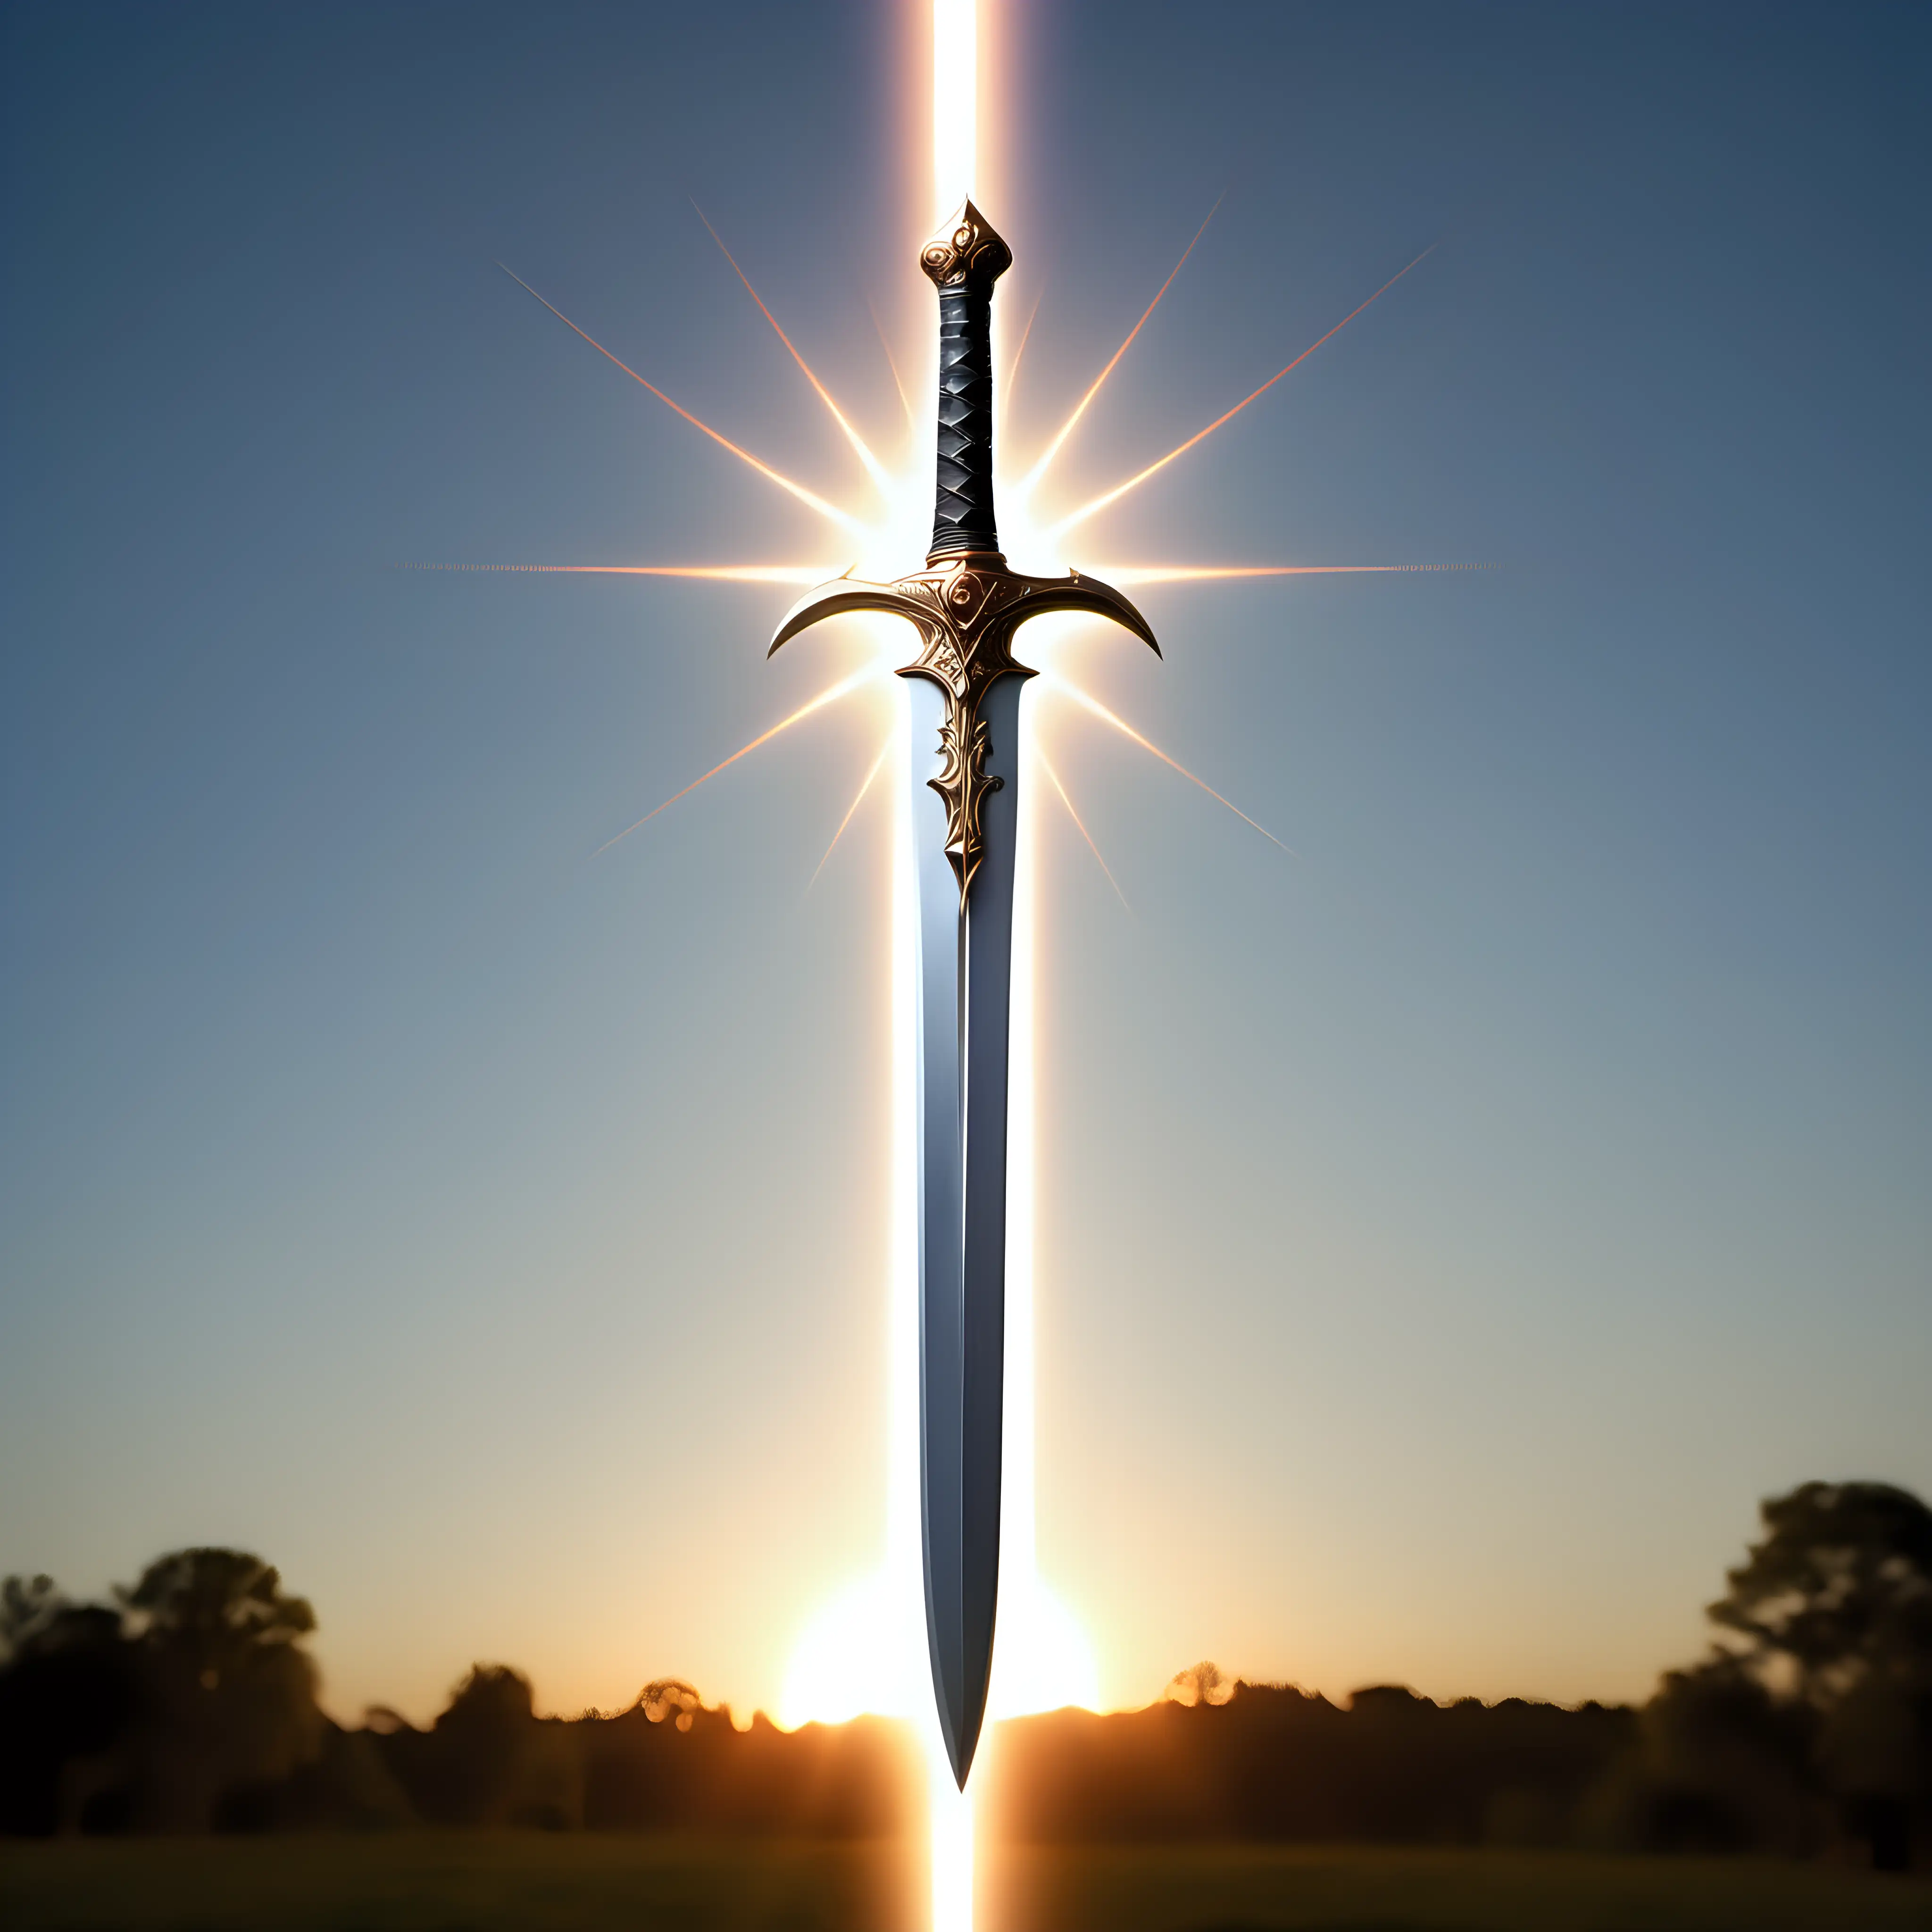 A smooth white sword reflecting the sky's sunset with rays of the sun